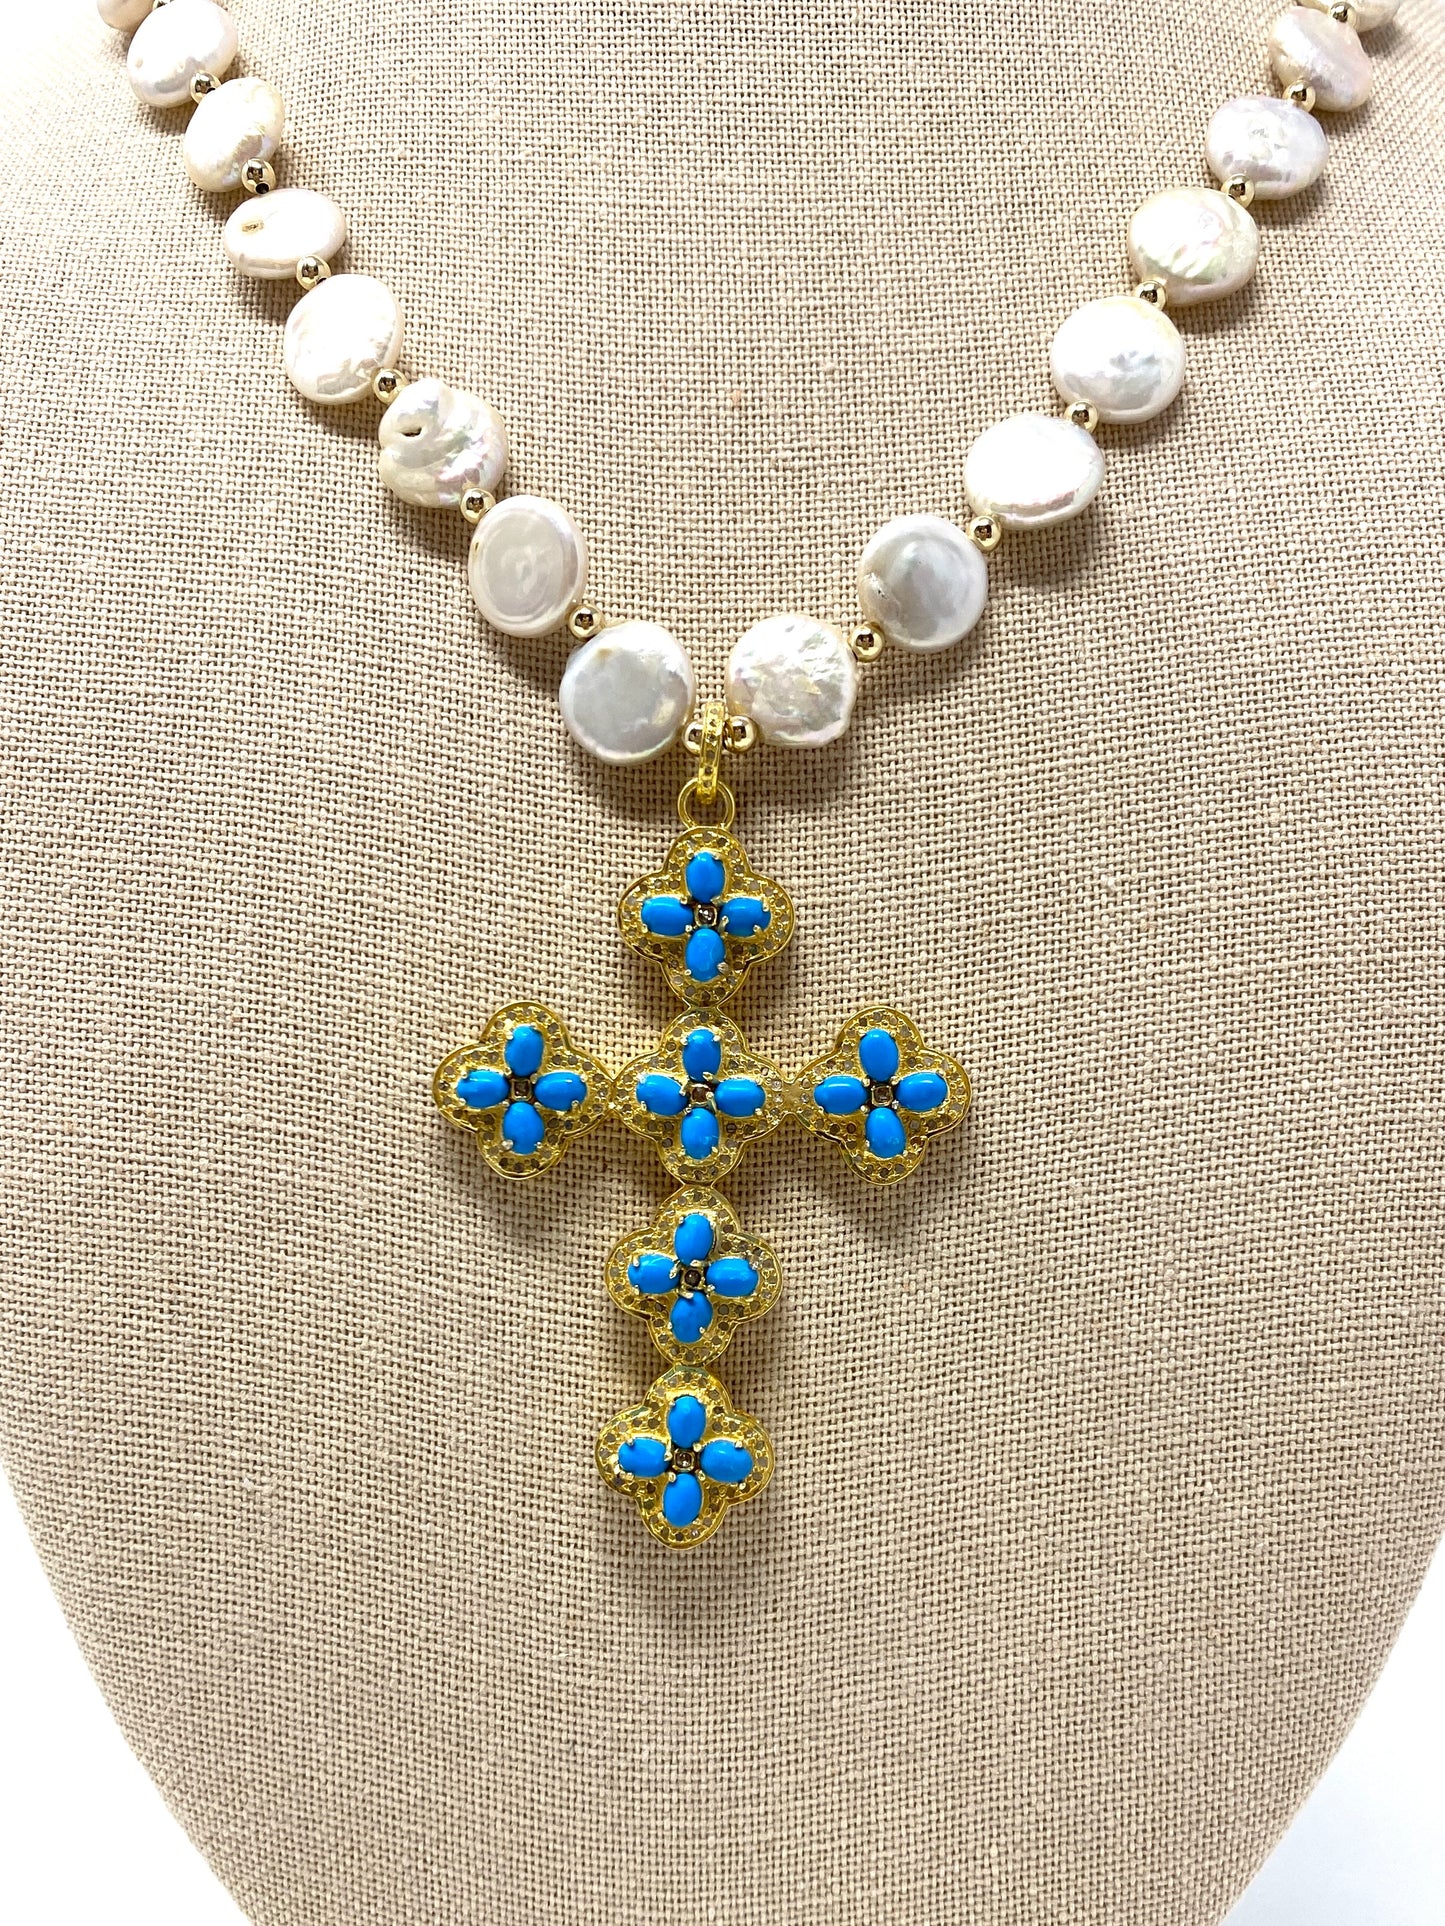 Coin Shaped Freshwater Pearl Necklace With Gold, Diamond and Turquoise Cross Pendant